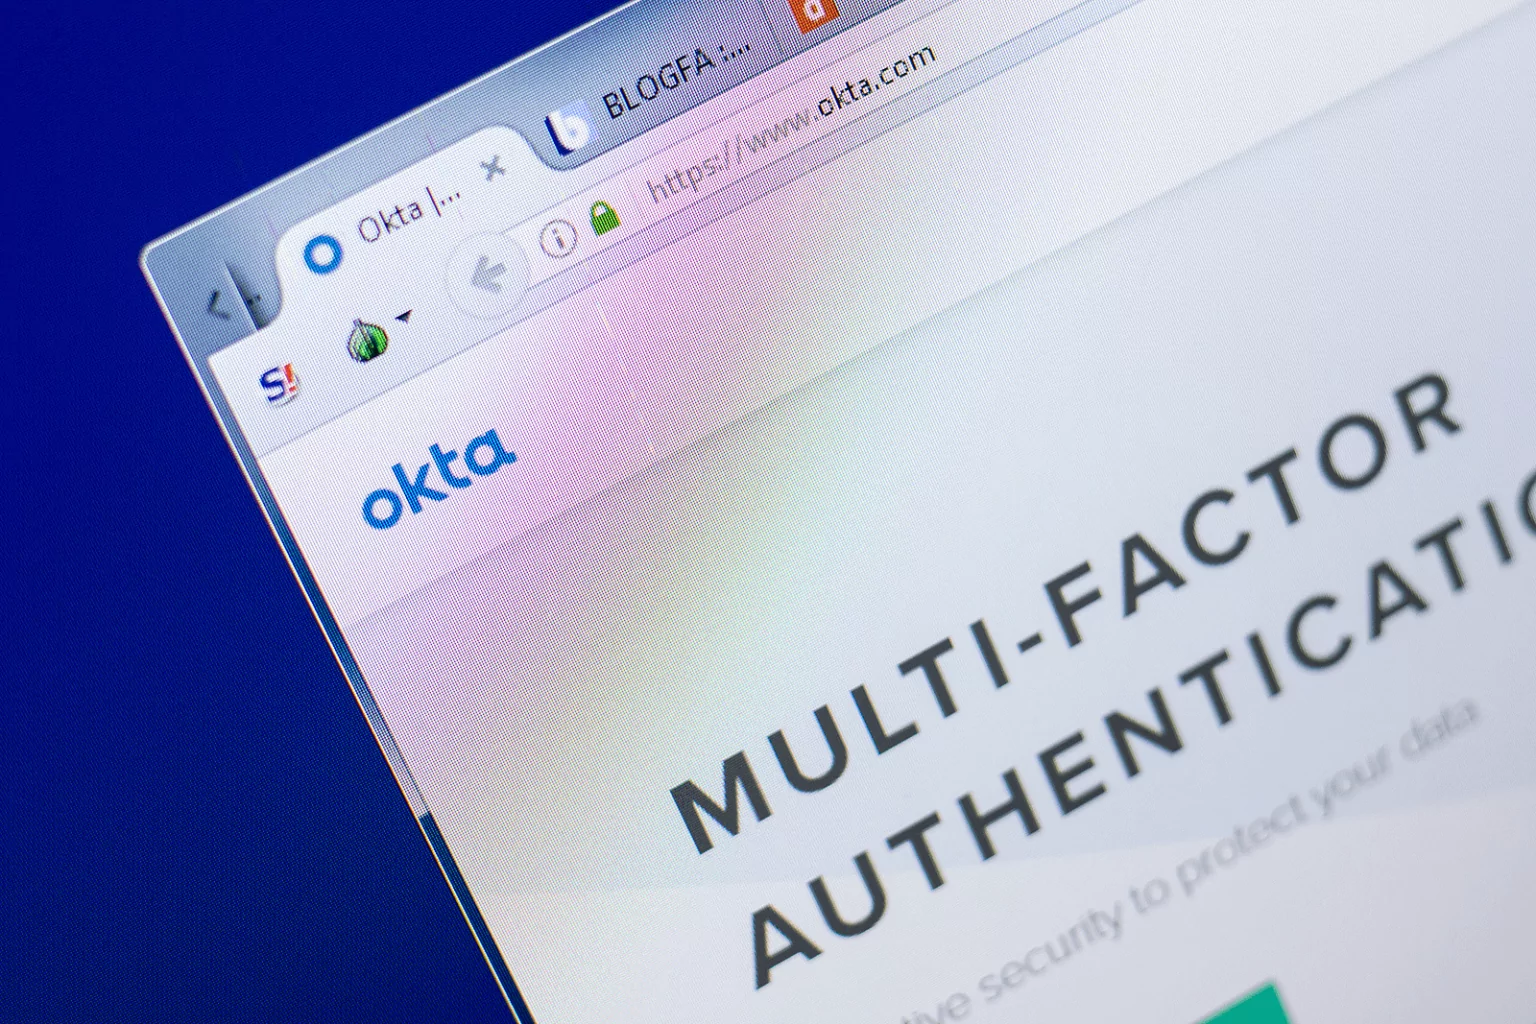 The Okta incident was a cautioning attack that pointed out the magnitude of supply chain risks.